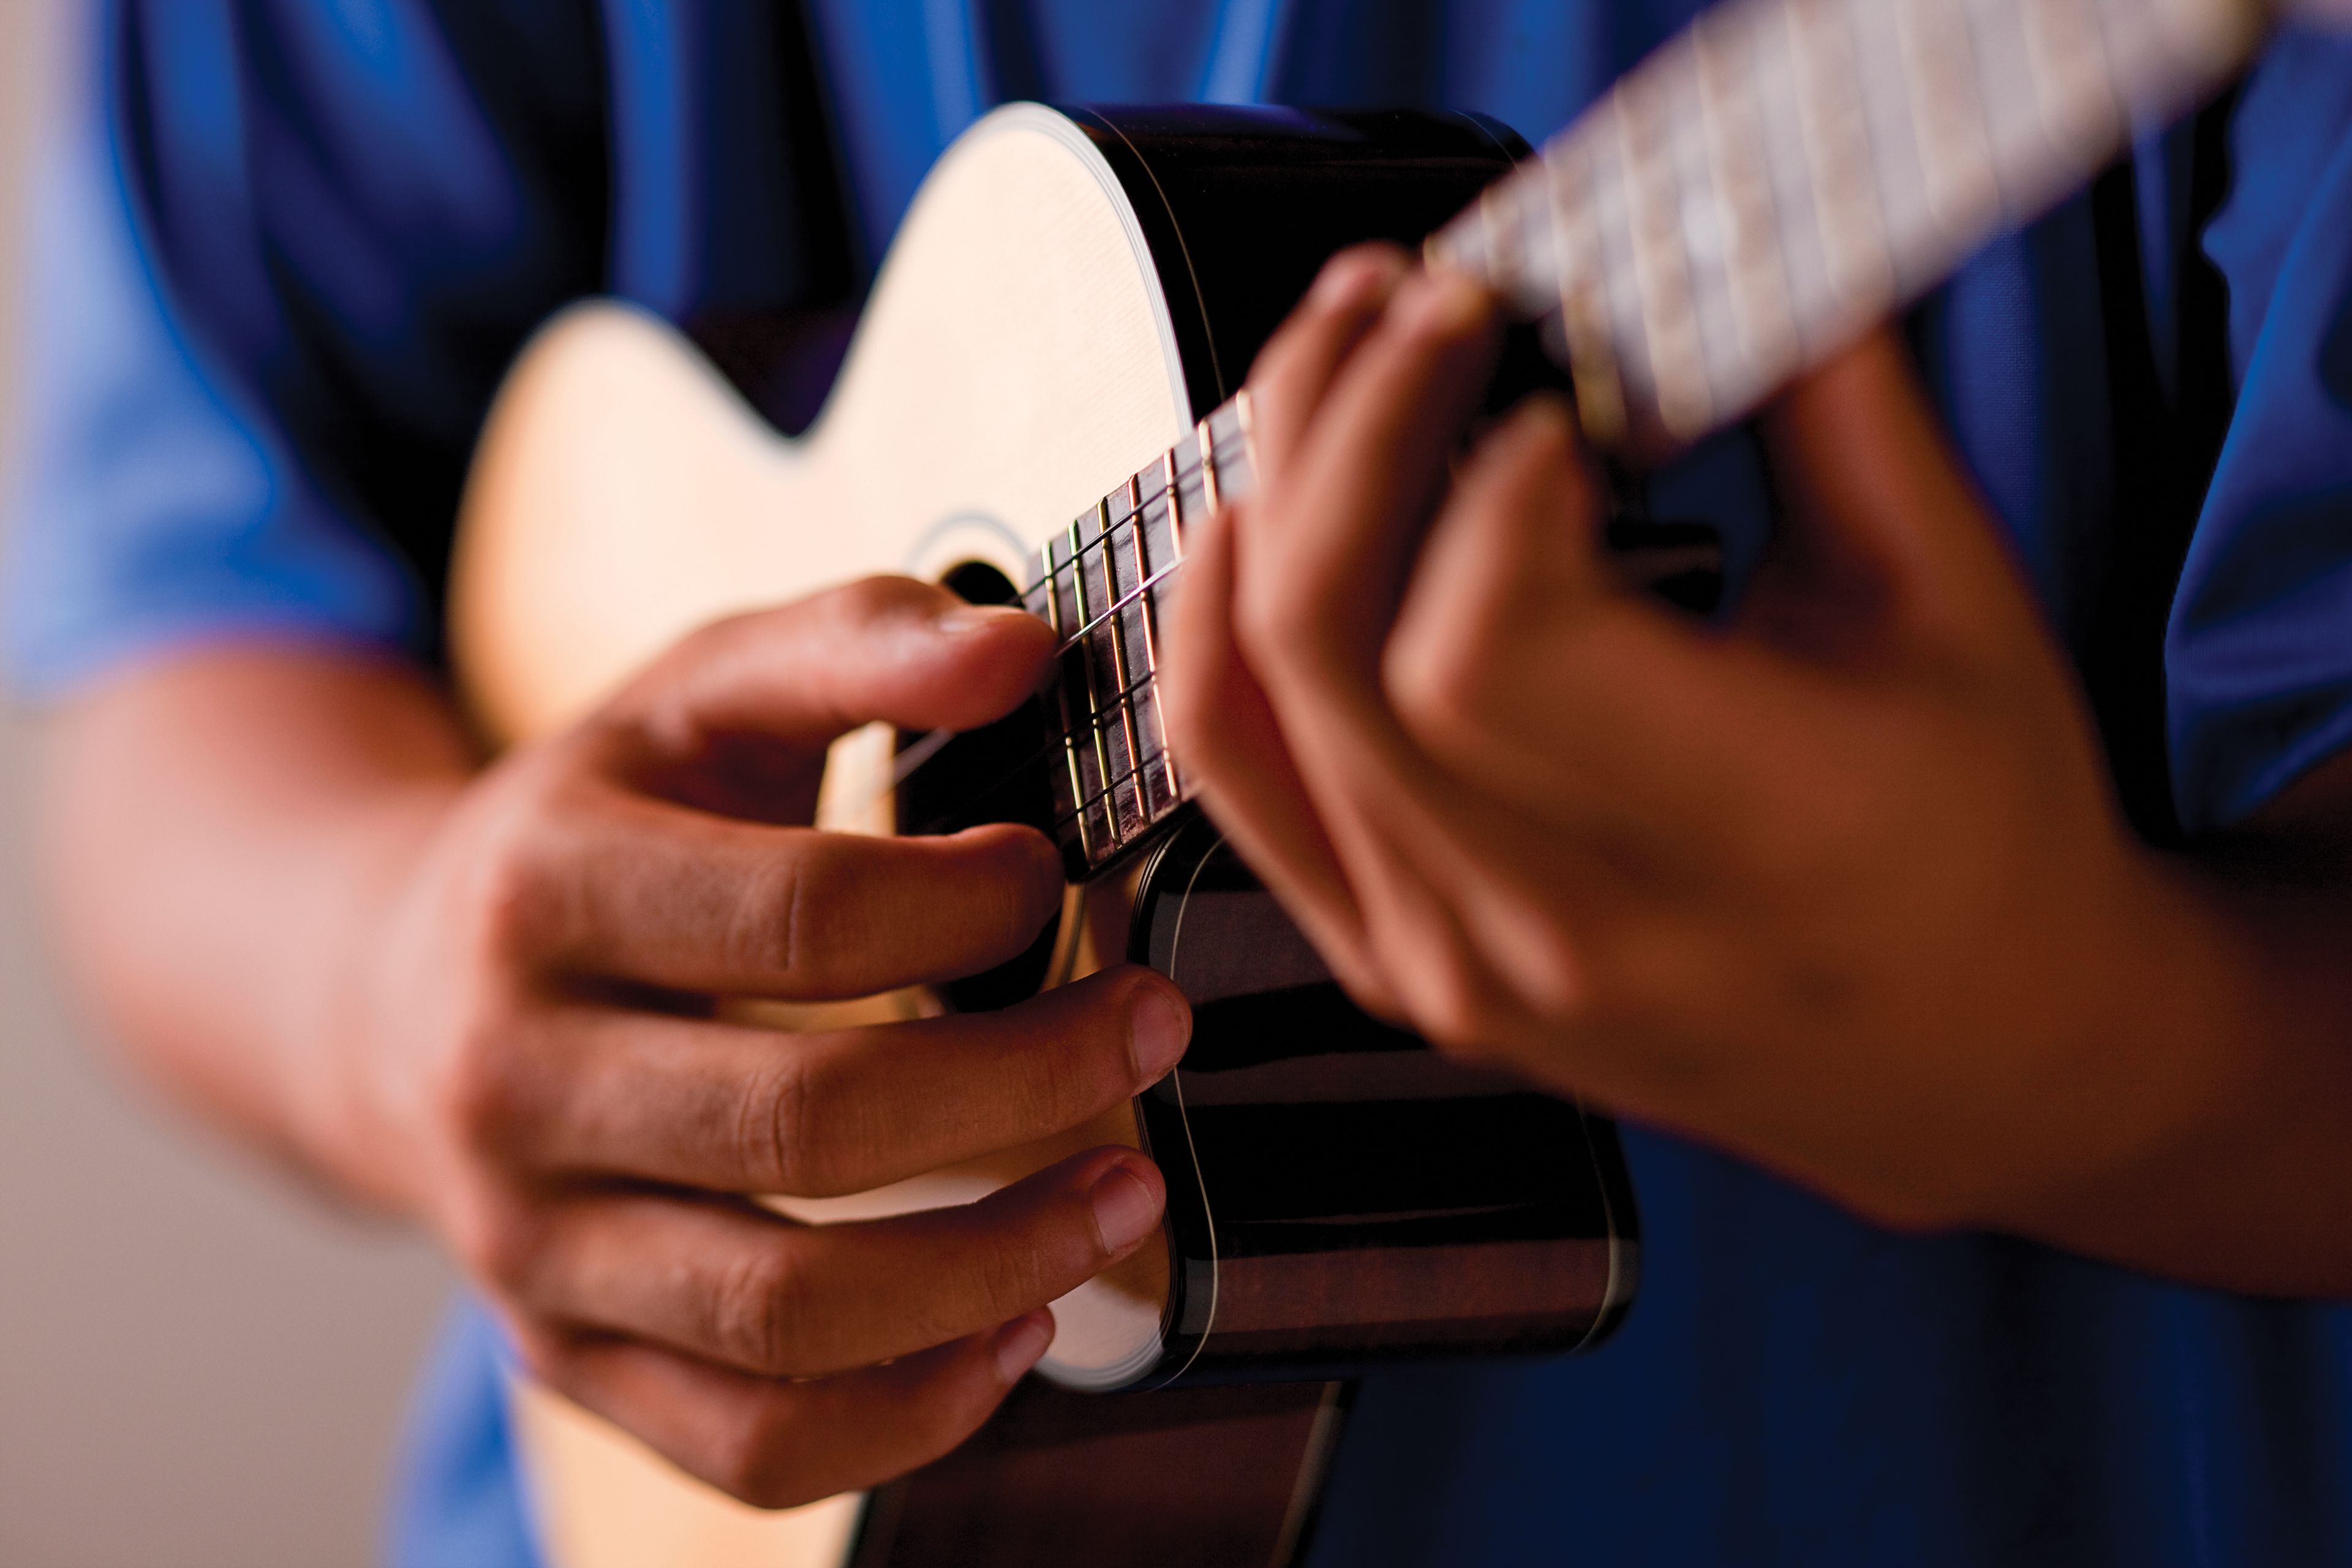 Two hands are seen strumming a ukulele.